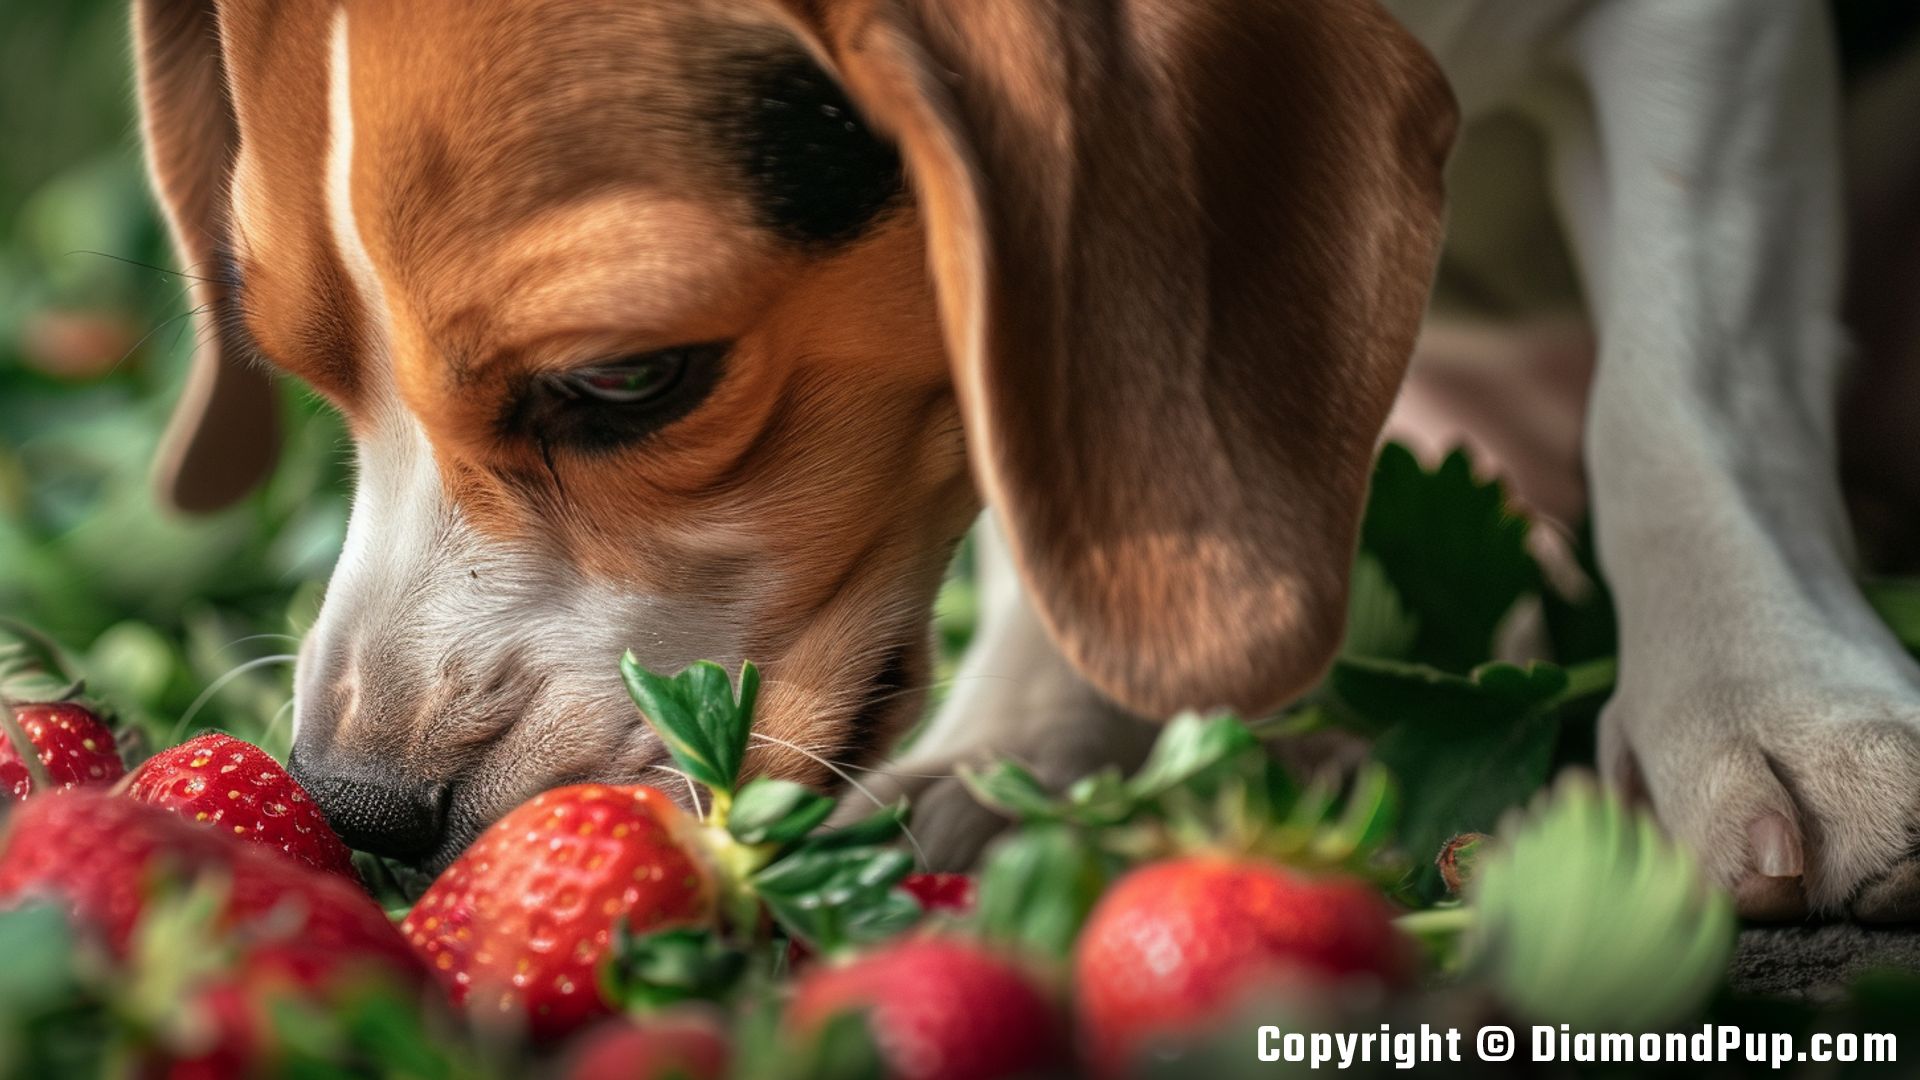 Photograph of a Happy Beagle Snacking on Strawberries